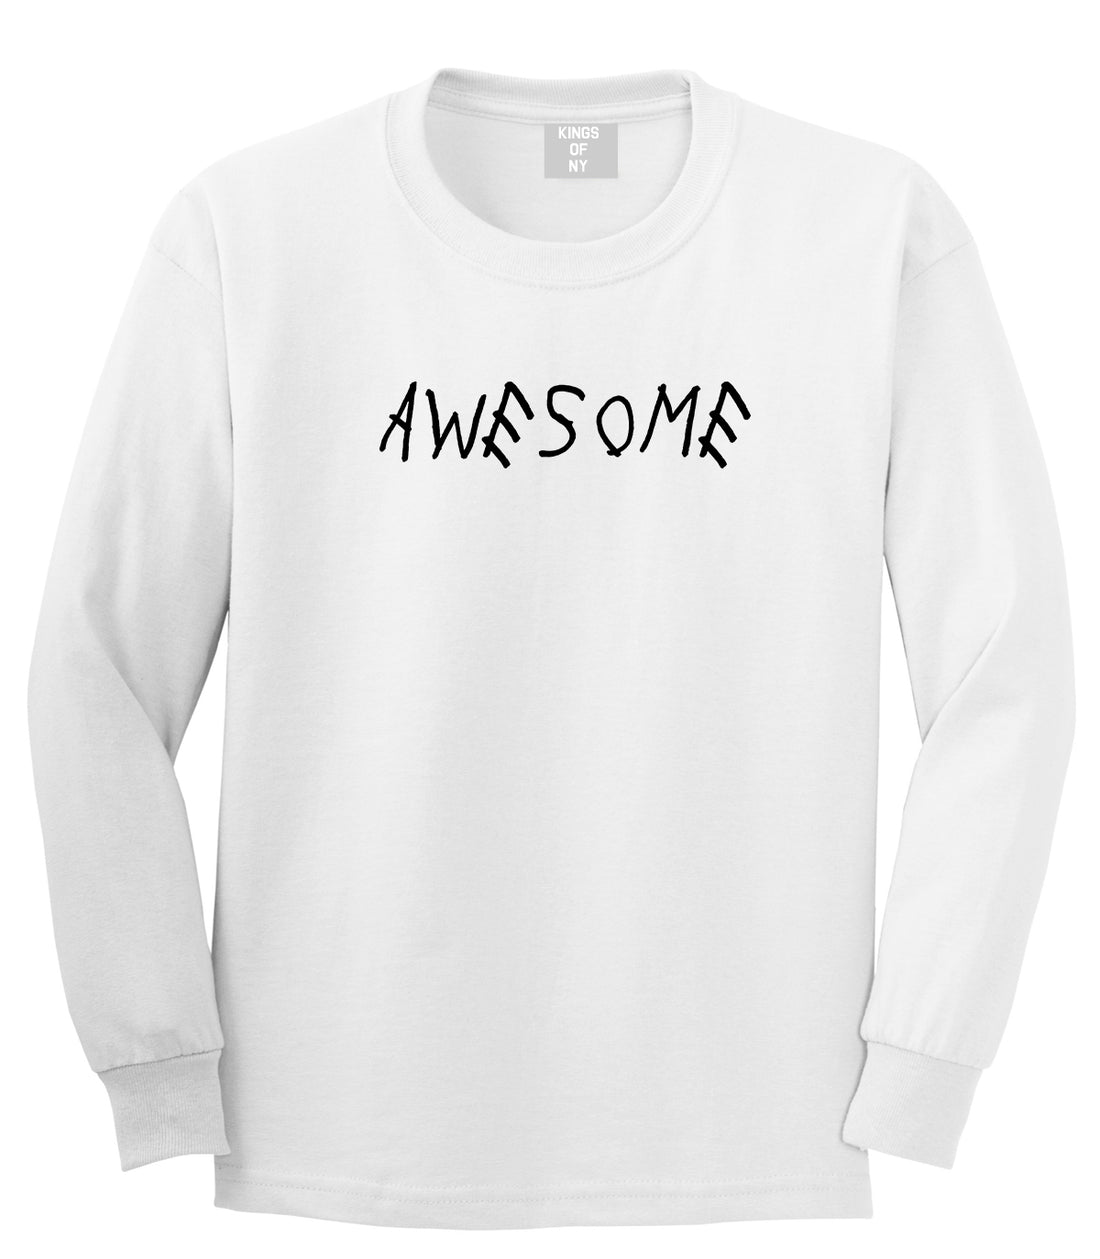 Awesome White Long Sleeve T-Shirt by Kings Of NY